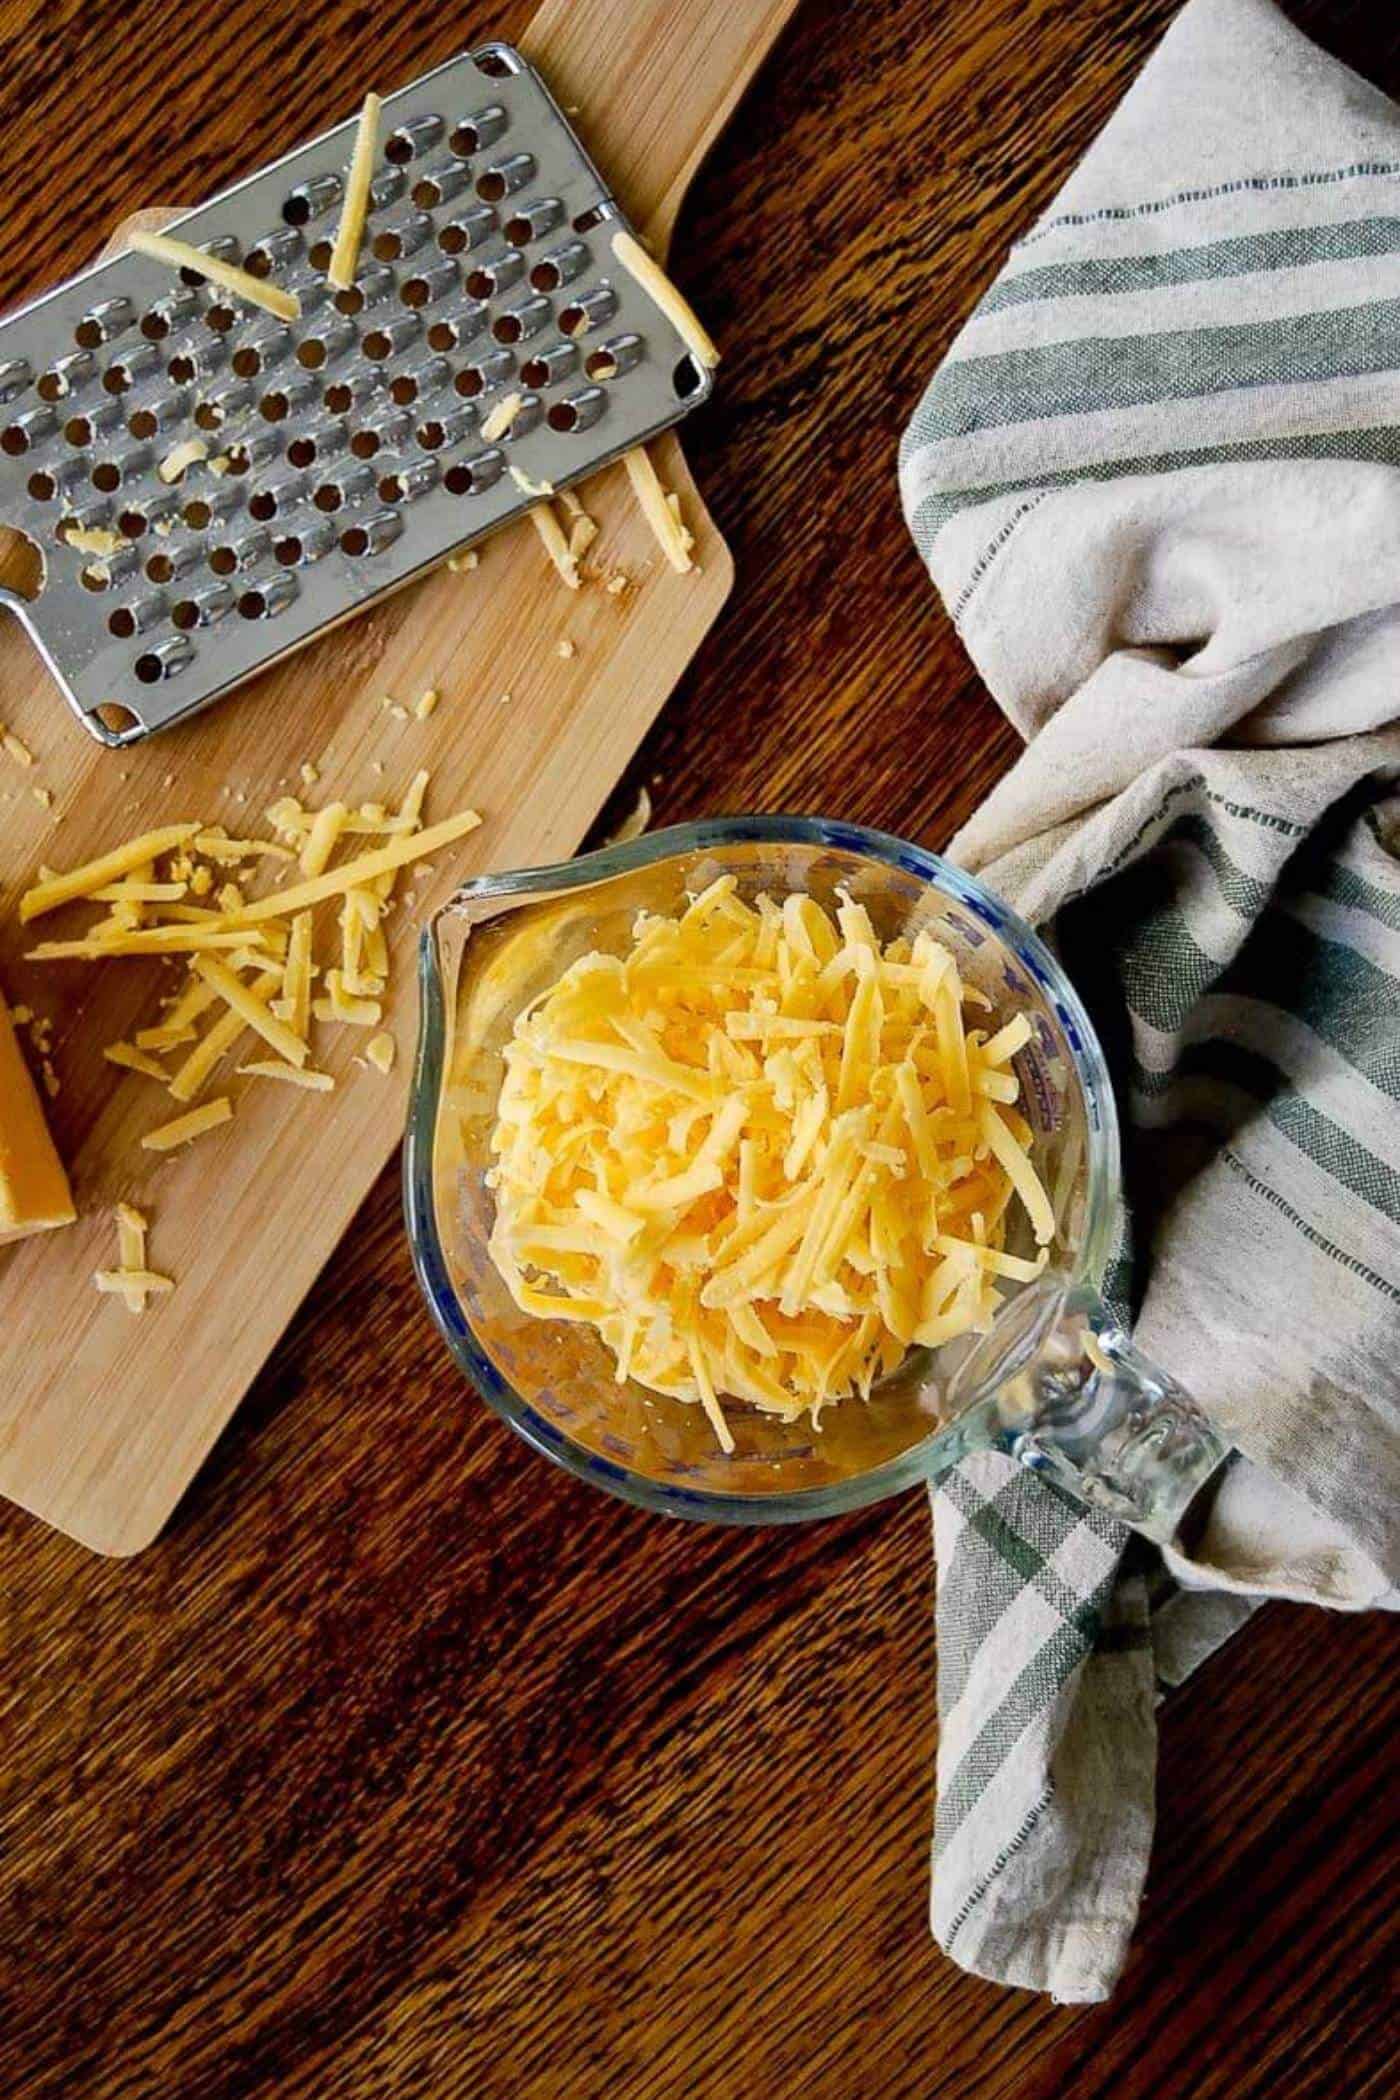 2 cups of shredded cheddar cheese, next to cheese grater.